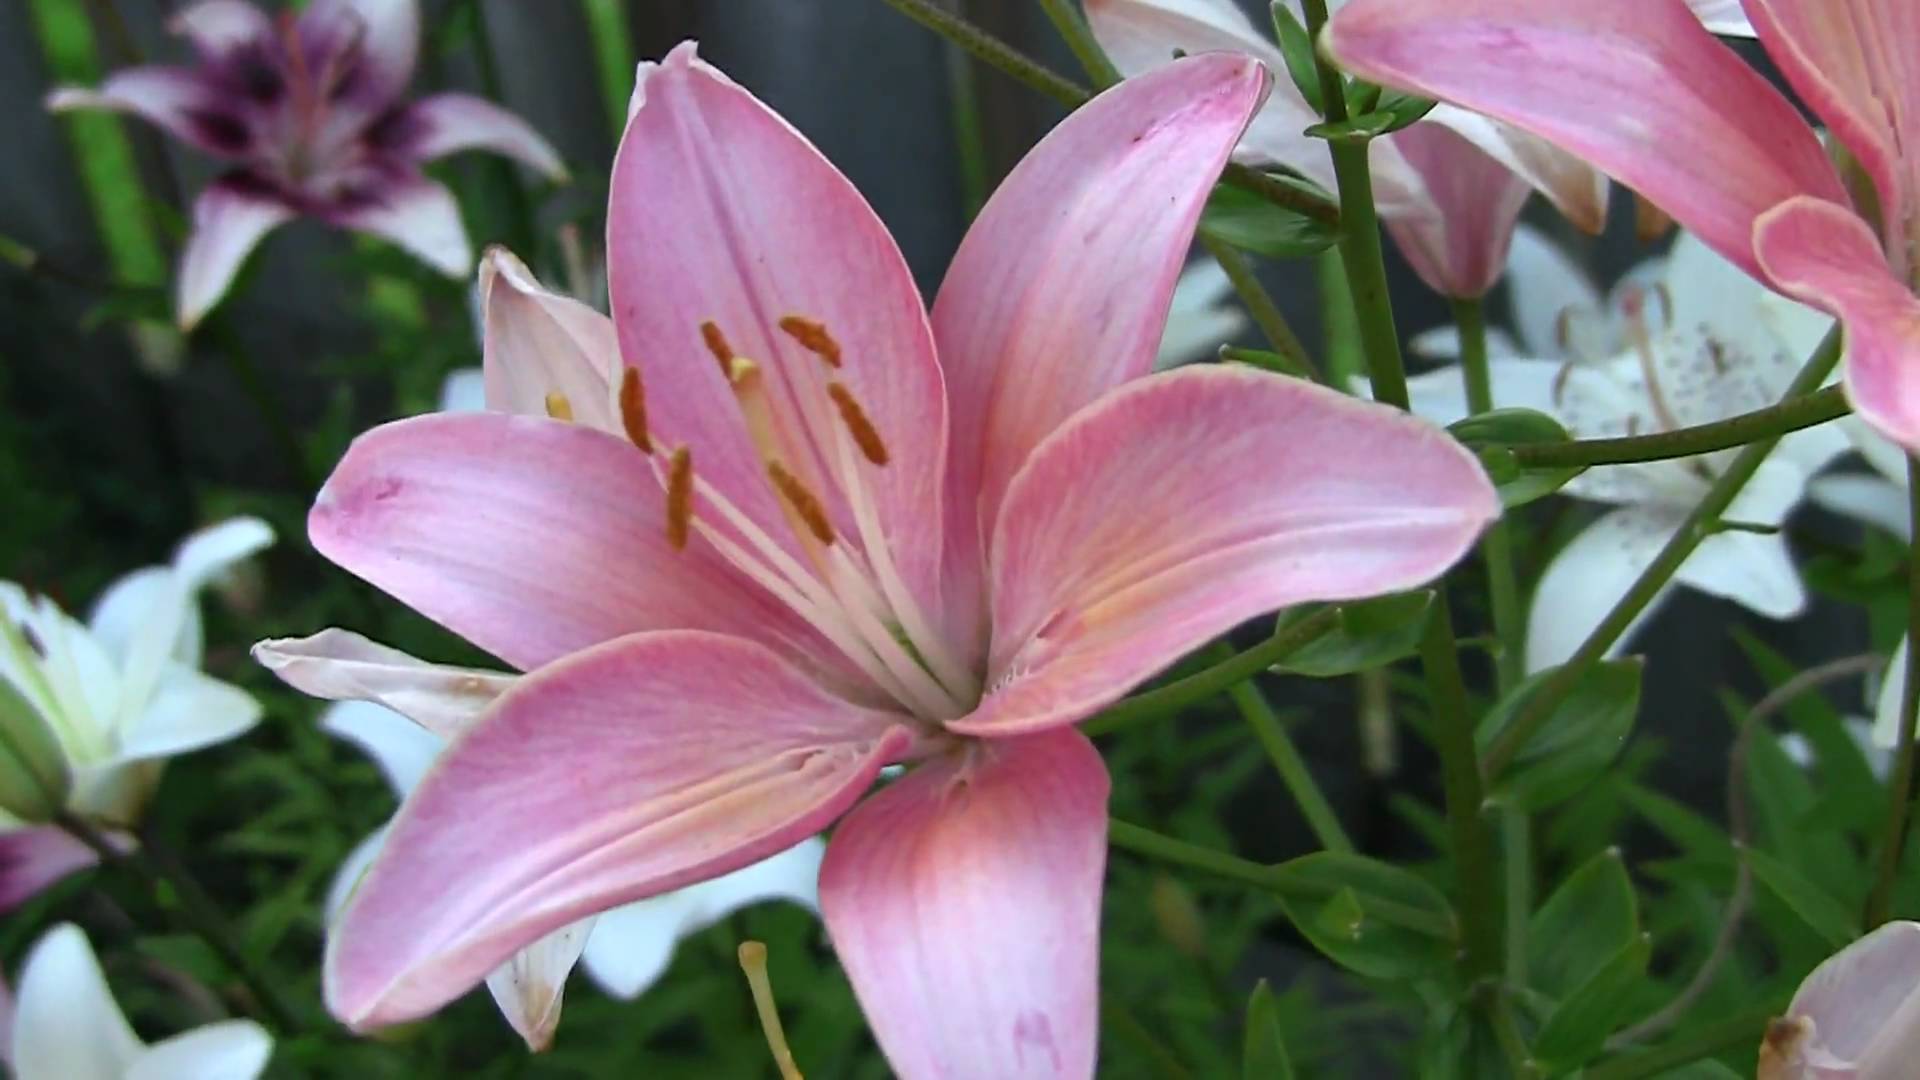 Lily flower image